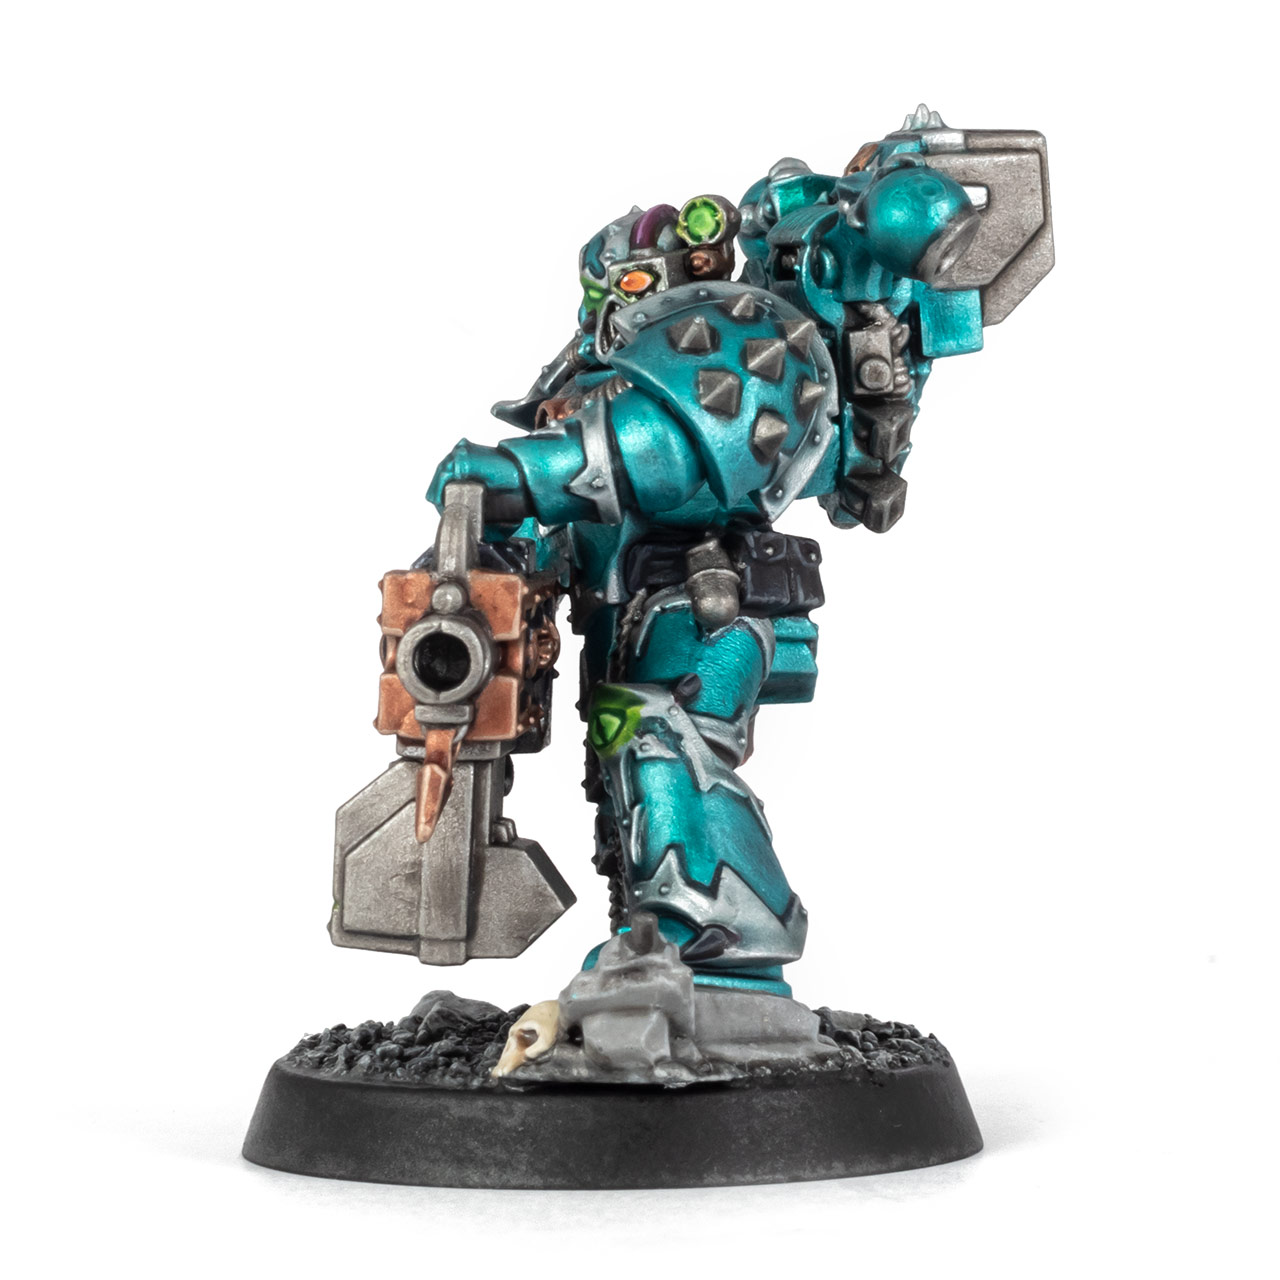 Alpha Legion Chaos Space Marine Legionary Heavy Gunner with Heavy Bolter painted by Stahly, side